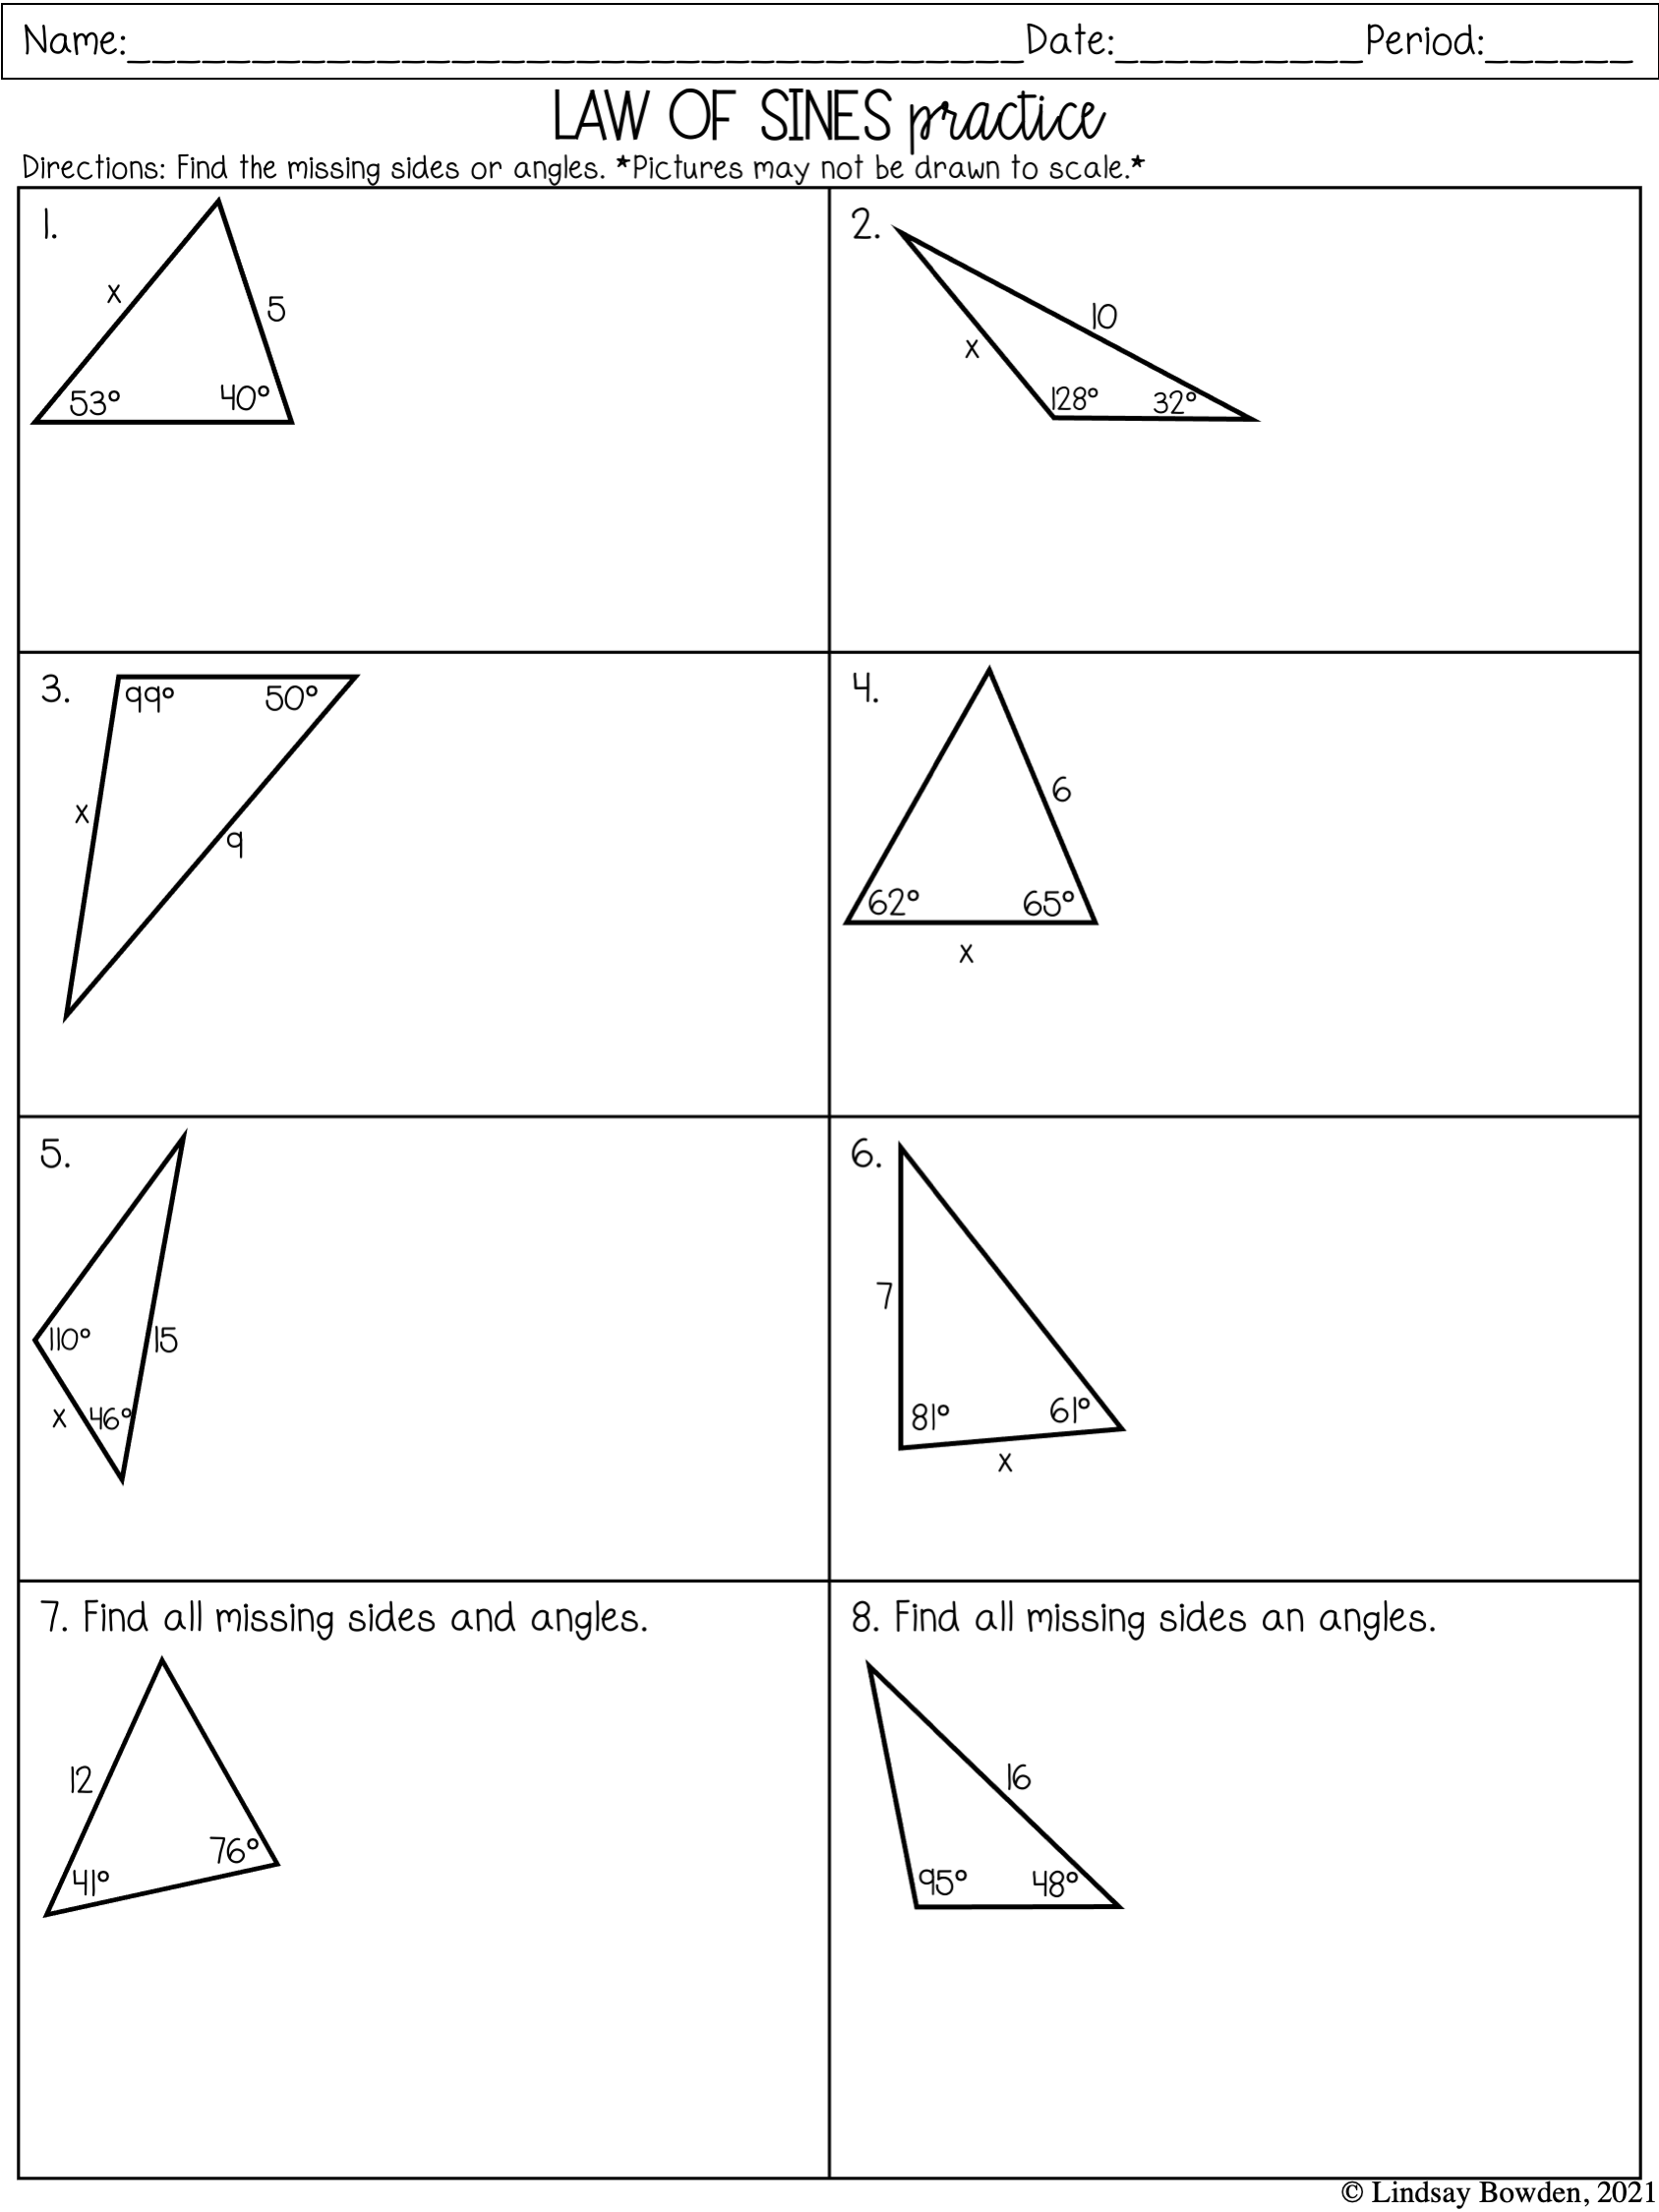 Law of Sines and Cosines Notes and Worksheets - Lindsay Bowden In Law Of Sines Worksheet Answers